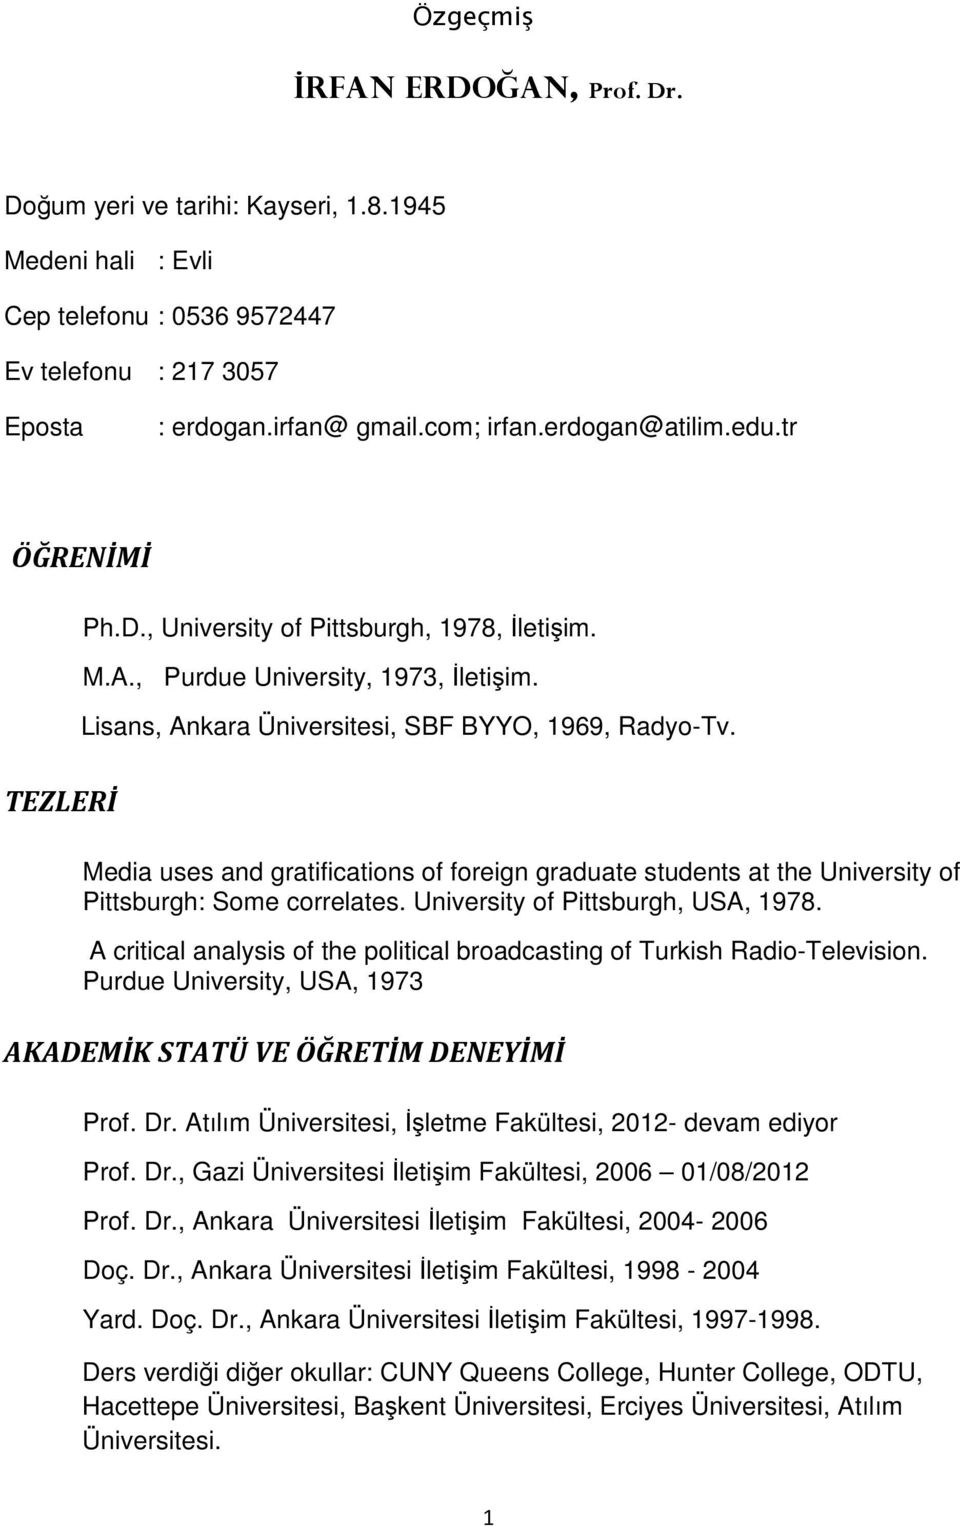 TEZLERİ Media uses and gratifications of foreign graduate students at the University of Pittsburgh: Some correlates. University of Pittsburgh, USA, 1978.